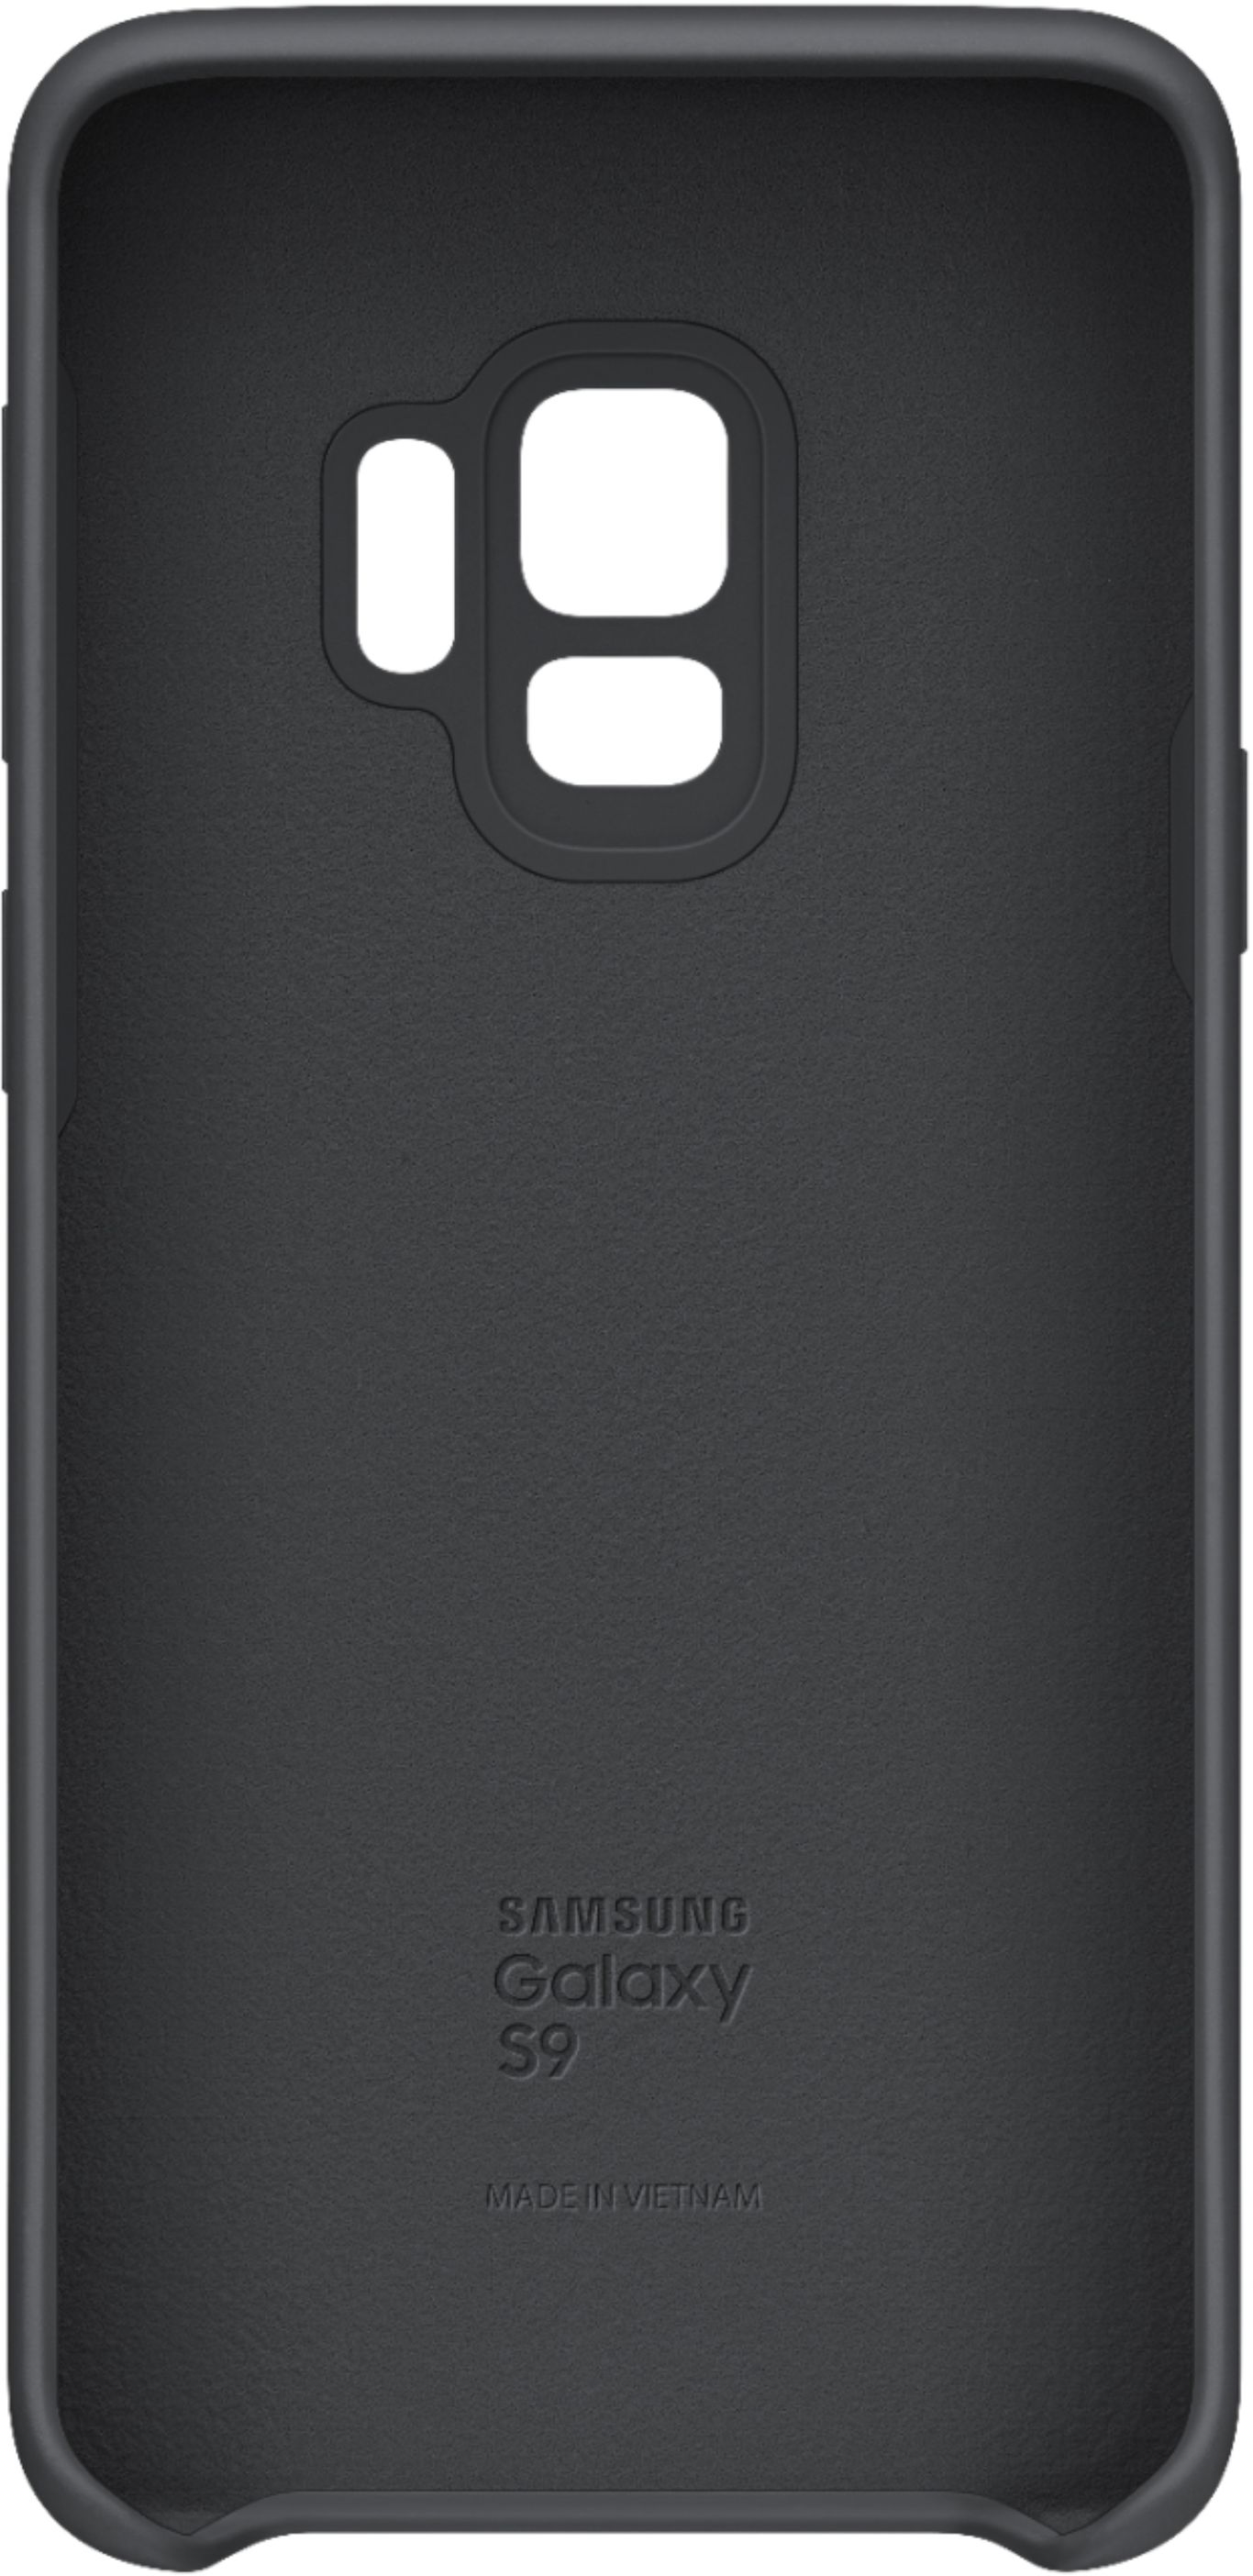 Best Buy: Silicone Cover for Galaxy S9 Cell Phones Black EF-PG960TBEGUS